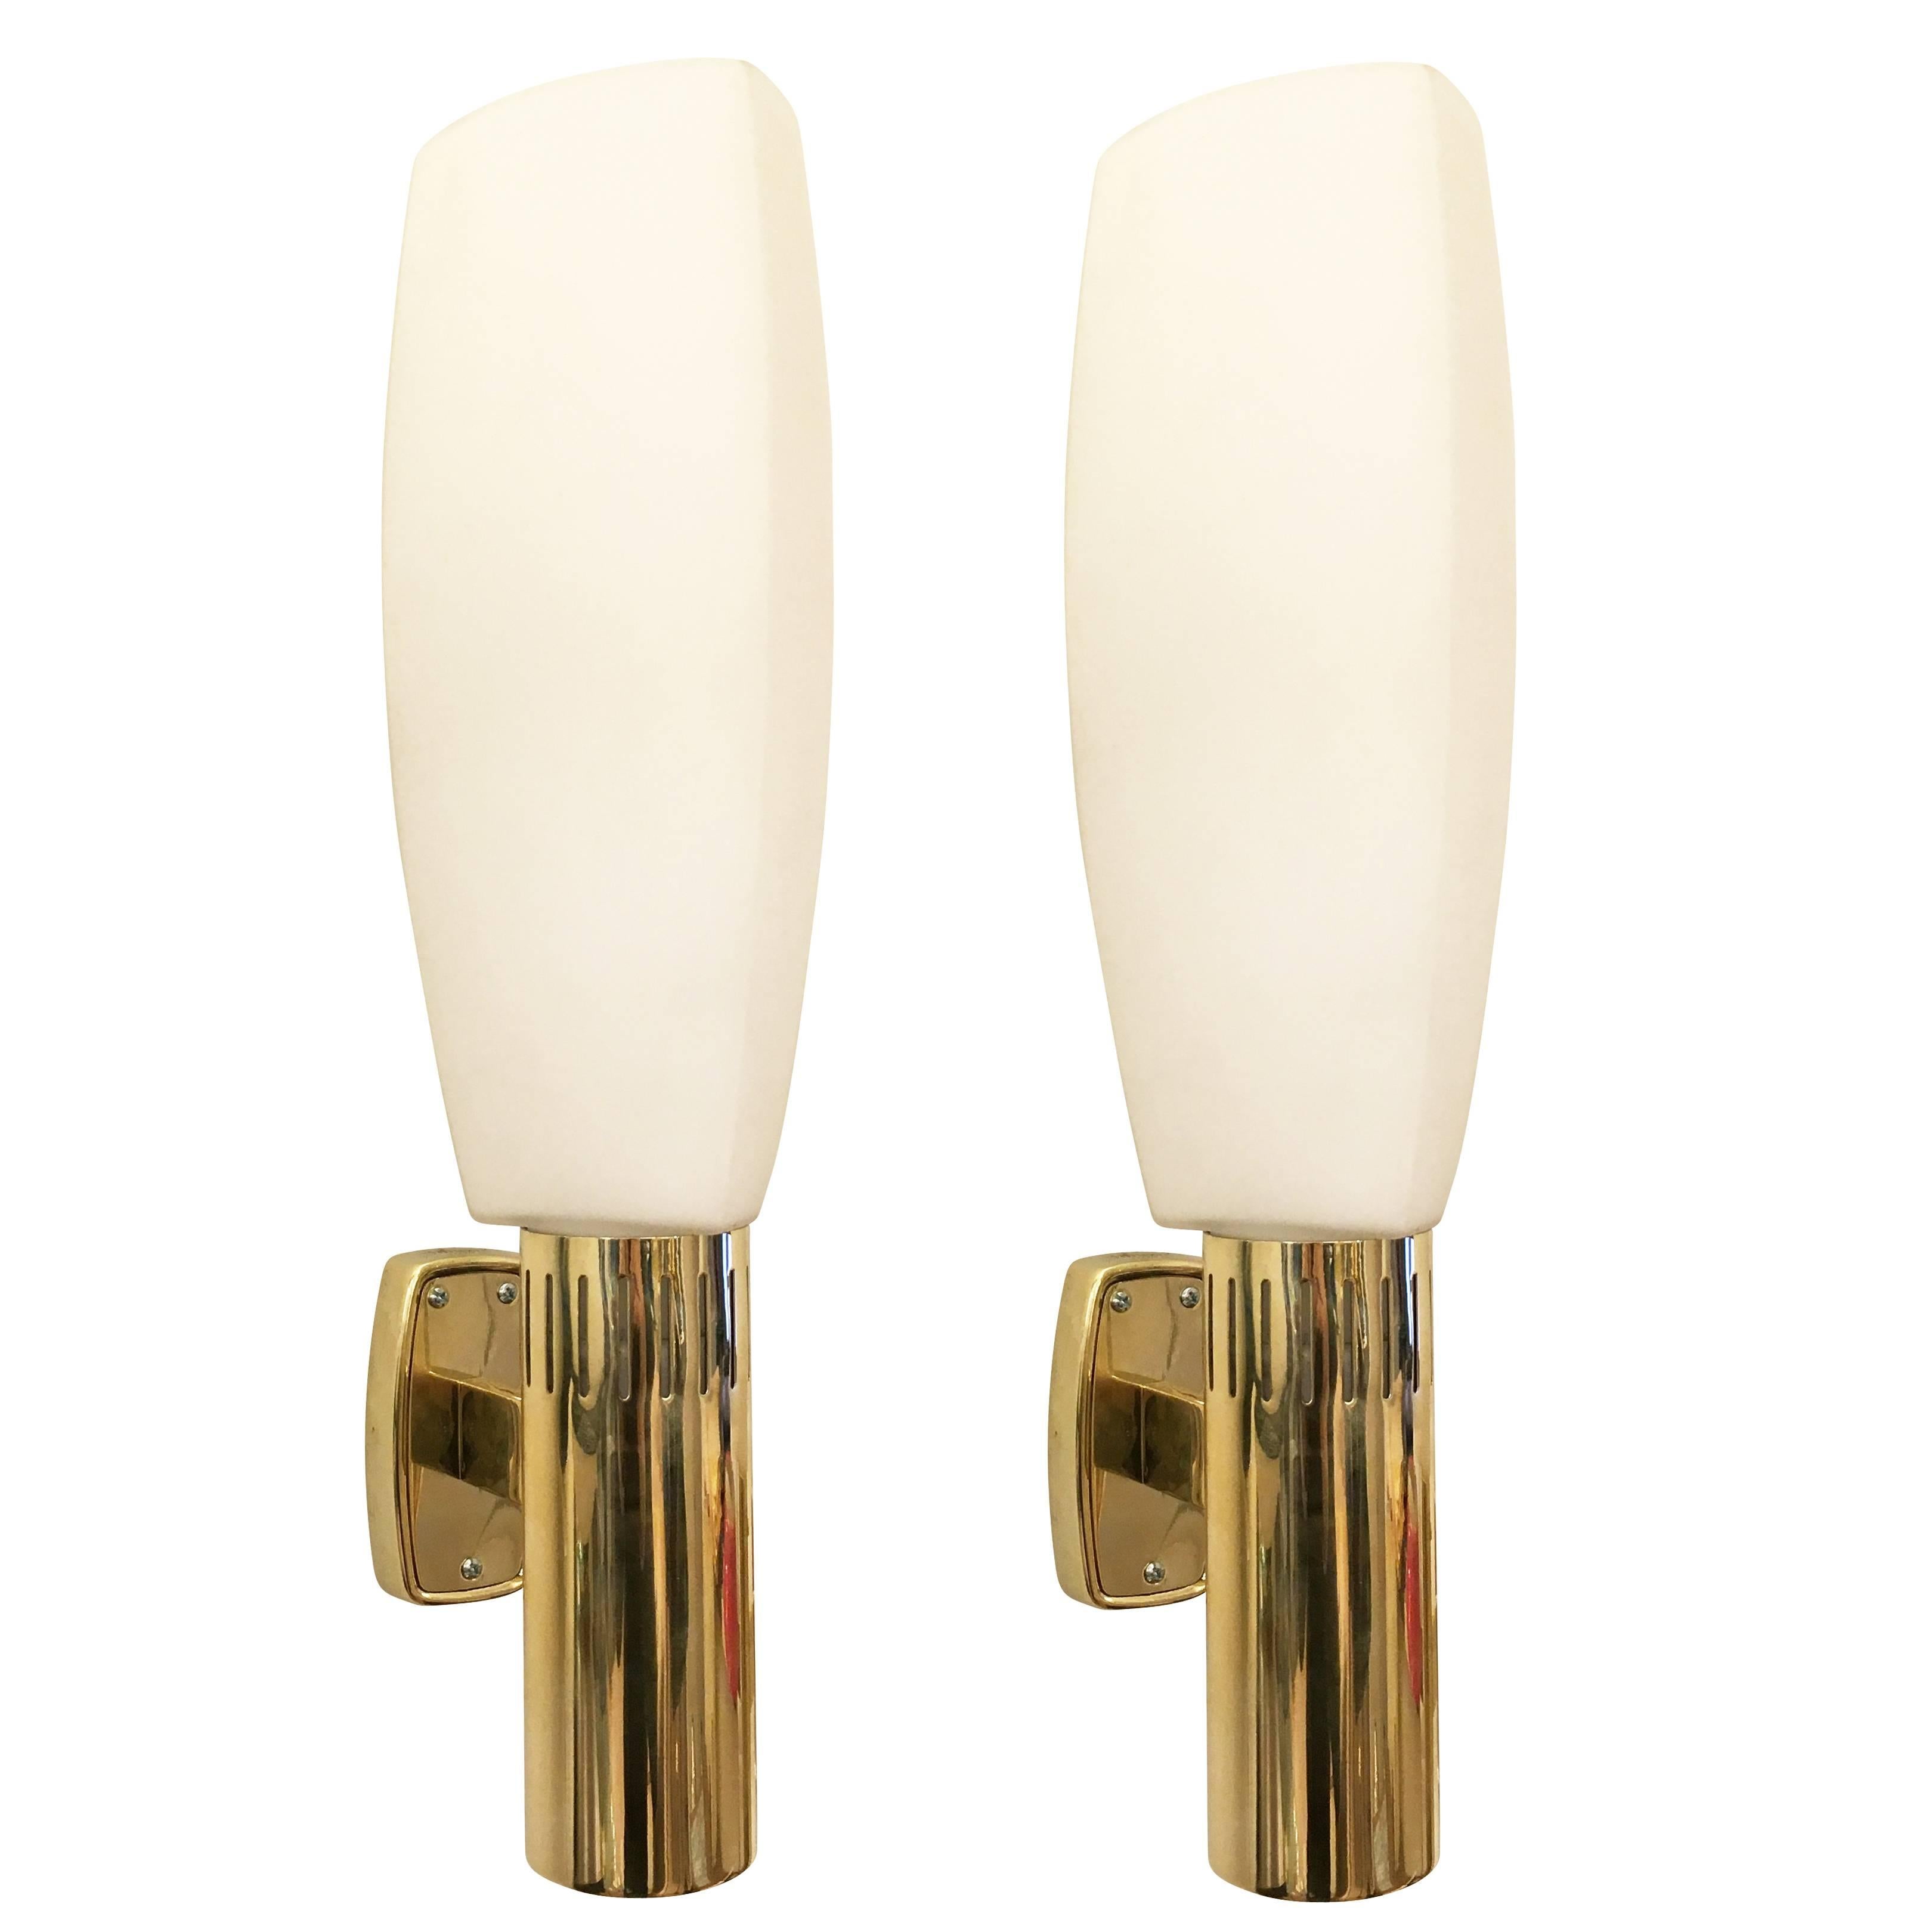 Large Stilnovo sconces with triangular frosted glass shades. Each is marked on the back-plate. Three available. Price per sconce.

Condition: Excellent vintage condition, minor wear consistent with age and use 

Measures Height 17.25